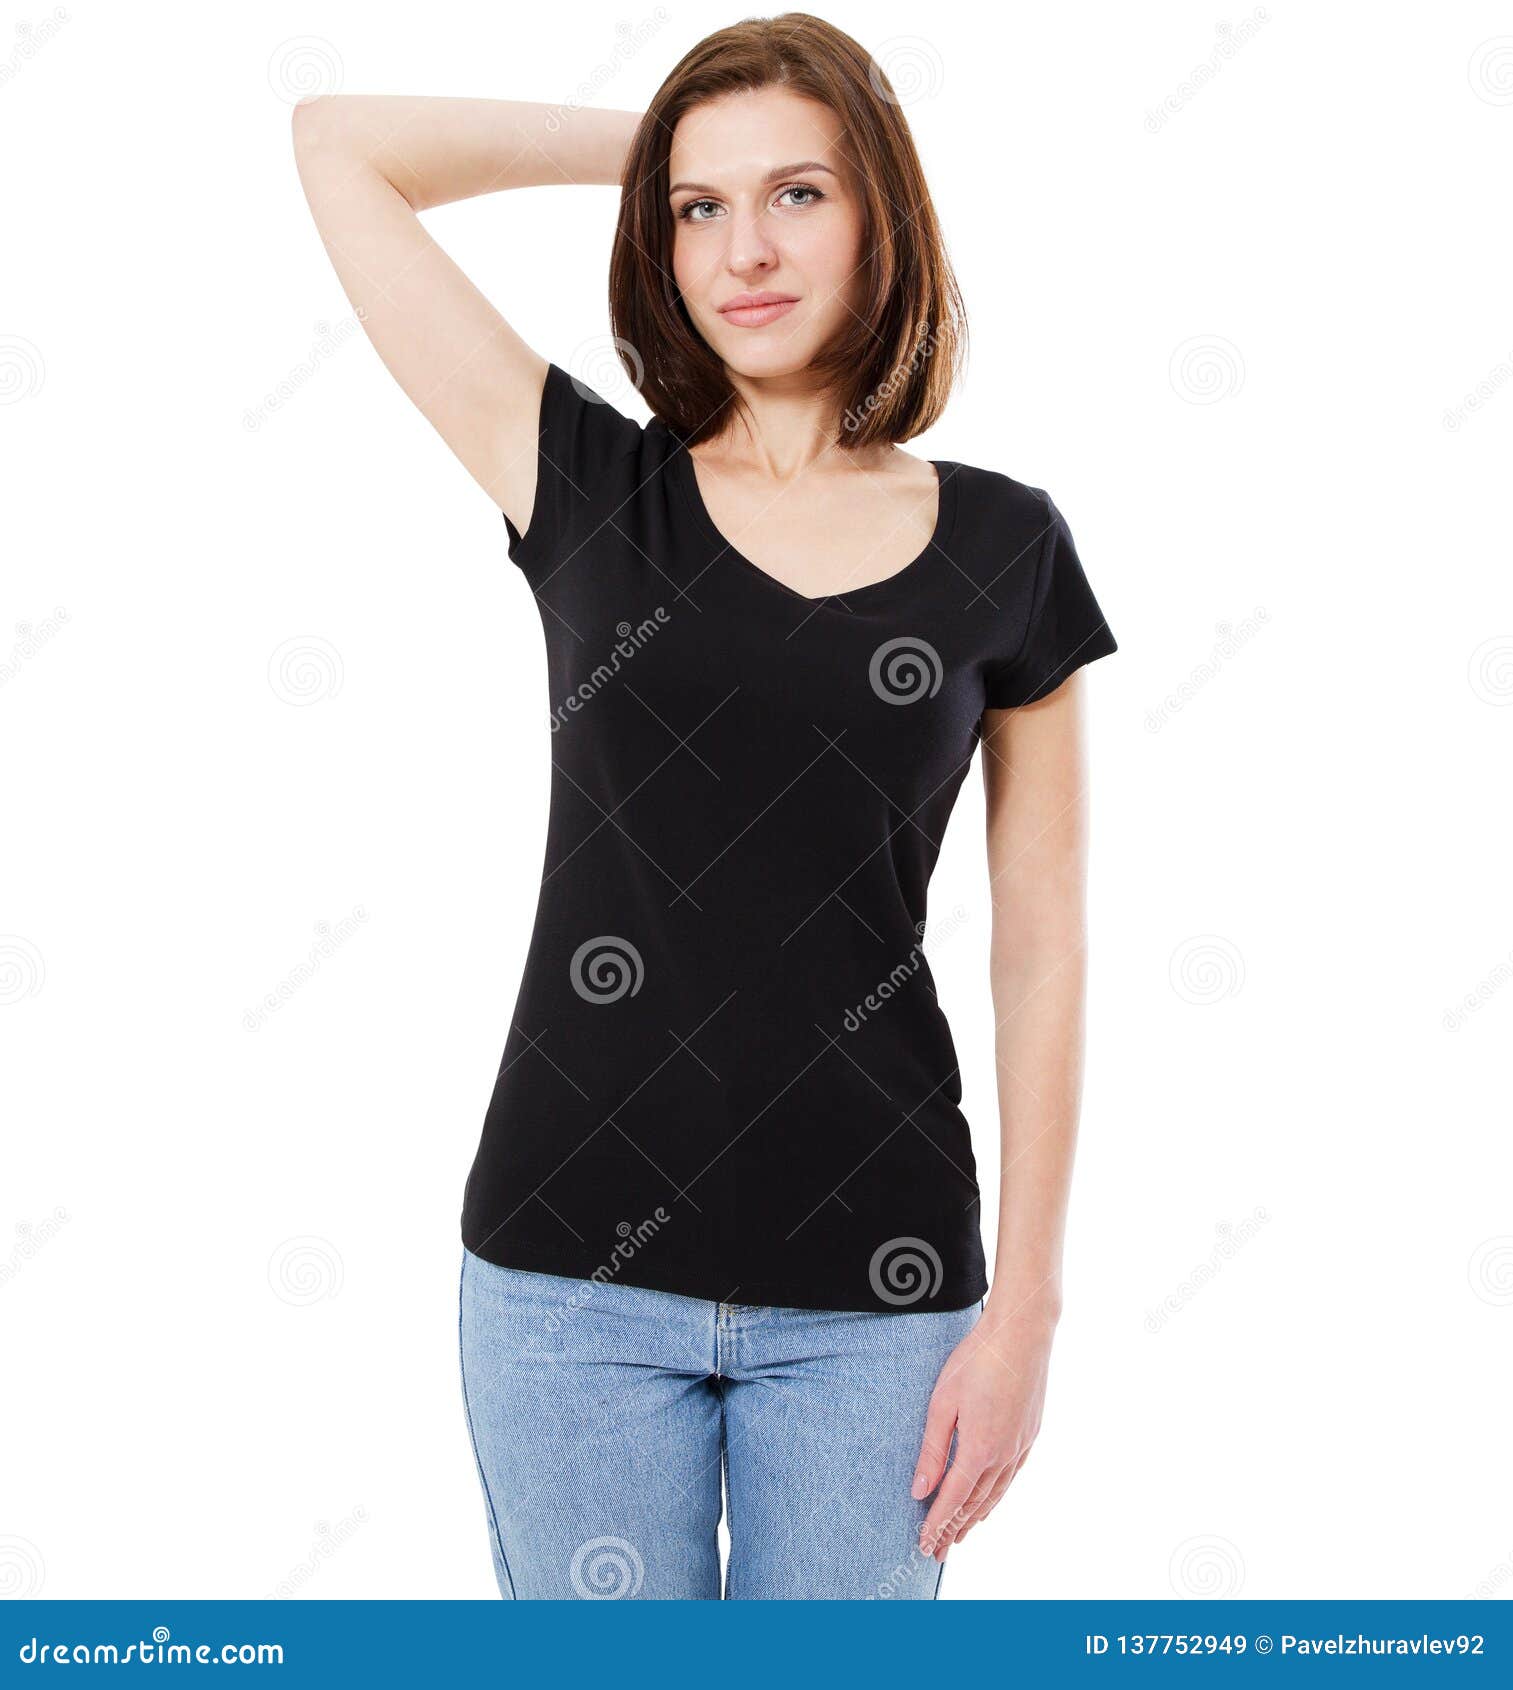 Download Blank Black T Shirt Design Mockup Women Stand Near Wal In Black Tshirt Clear Template Front Mock Up Empty Female Apparel Uniform Stock Image Image Of Girl Hands 137752949